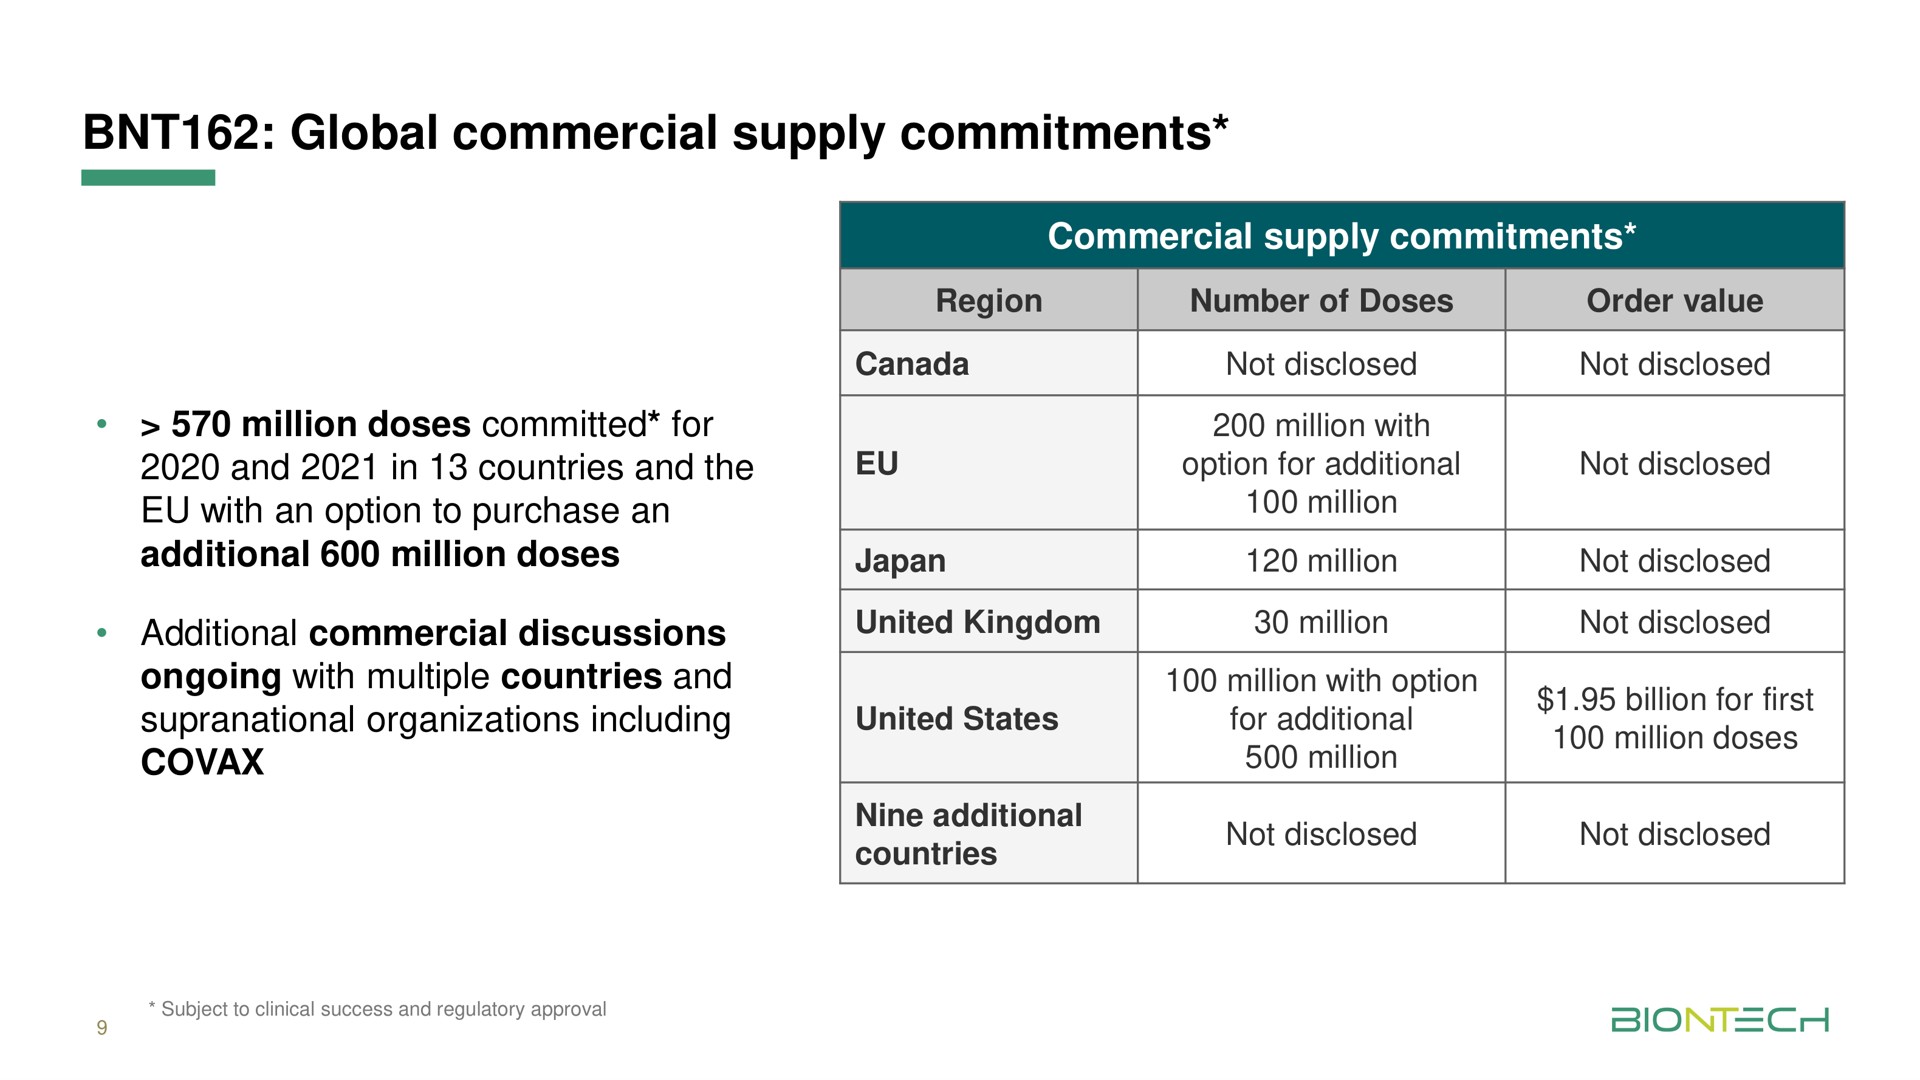 global commercial supply commitments | BioNTech